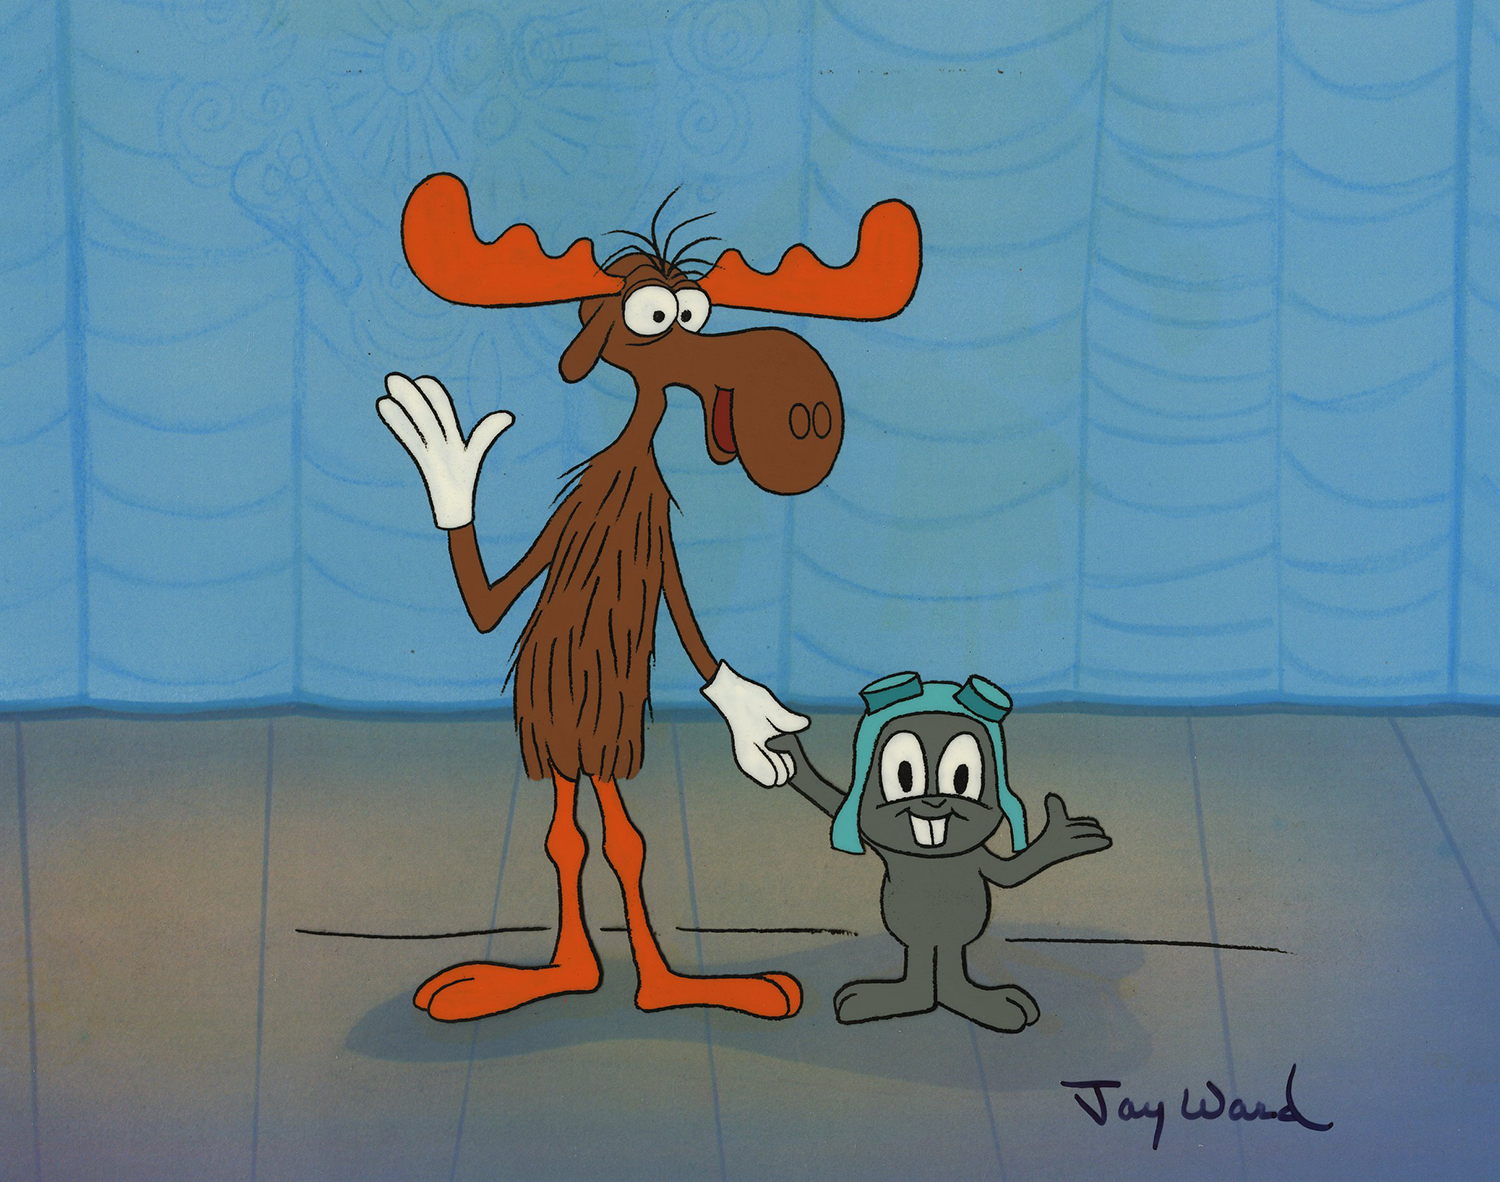 The image is inspired by the studio production The Rocky and Bullwinkle Sho...